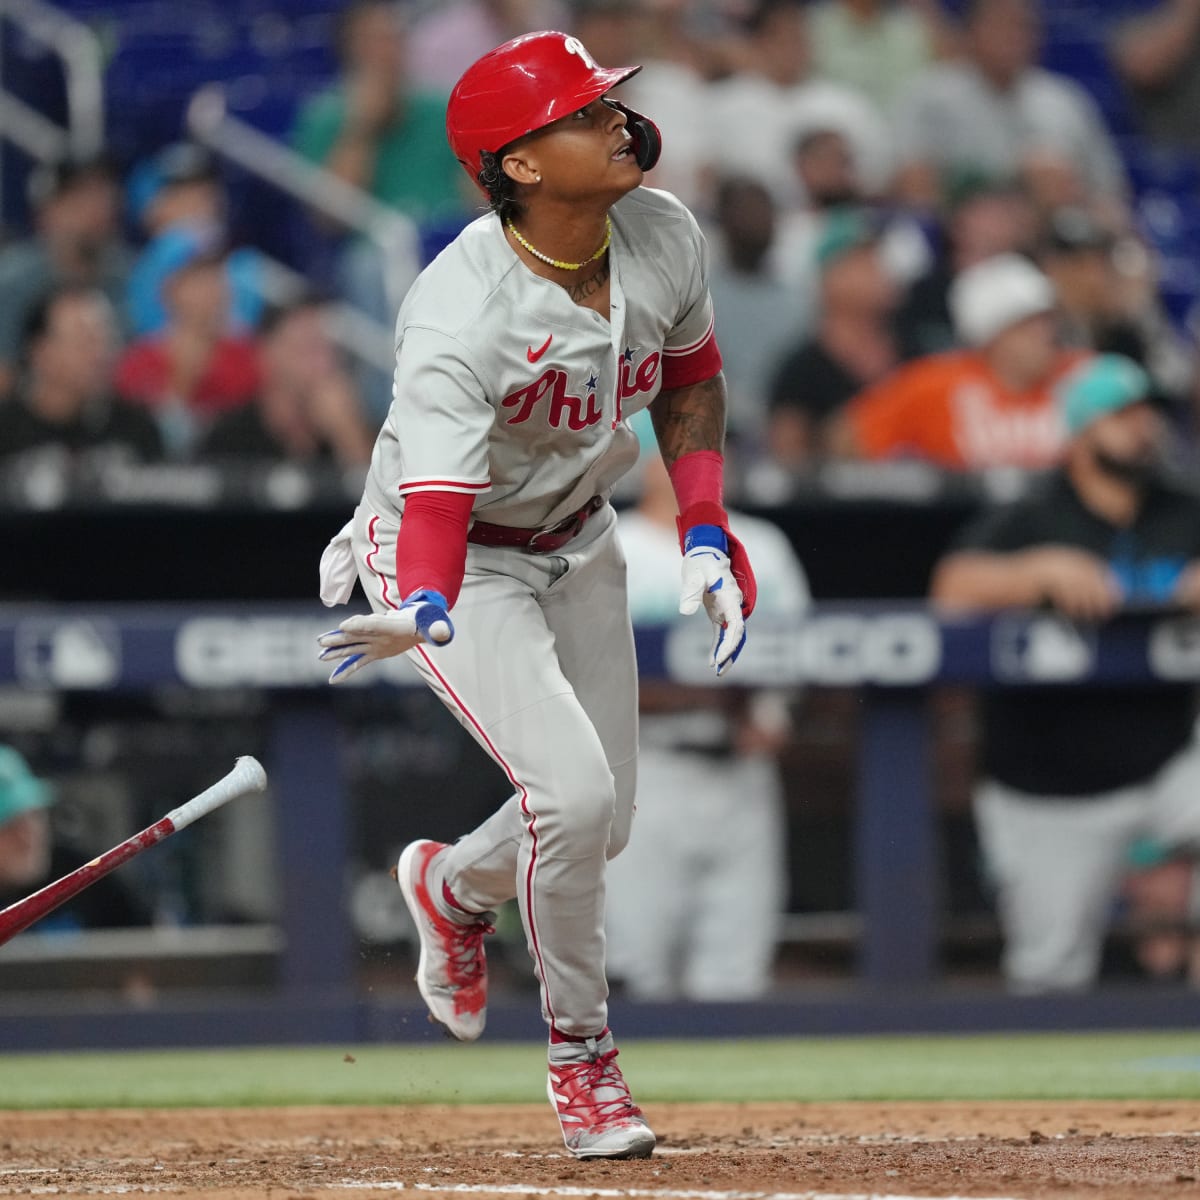 Cristian Pache looks to claim the CF spot for years to come